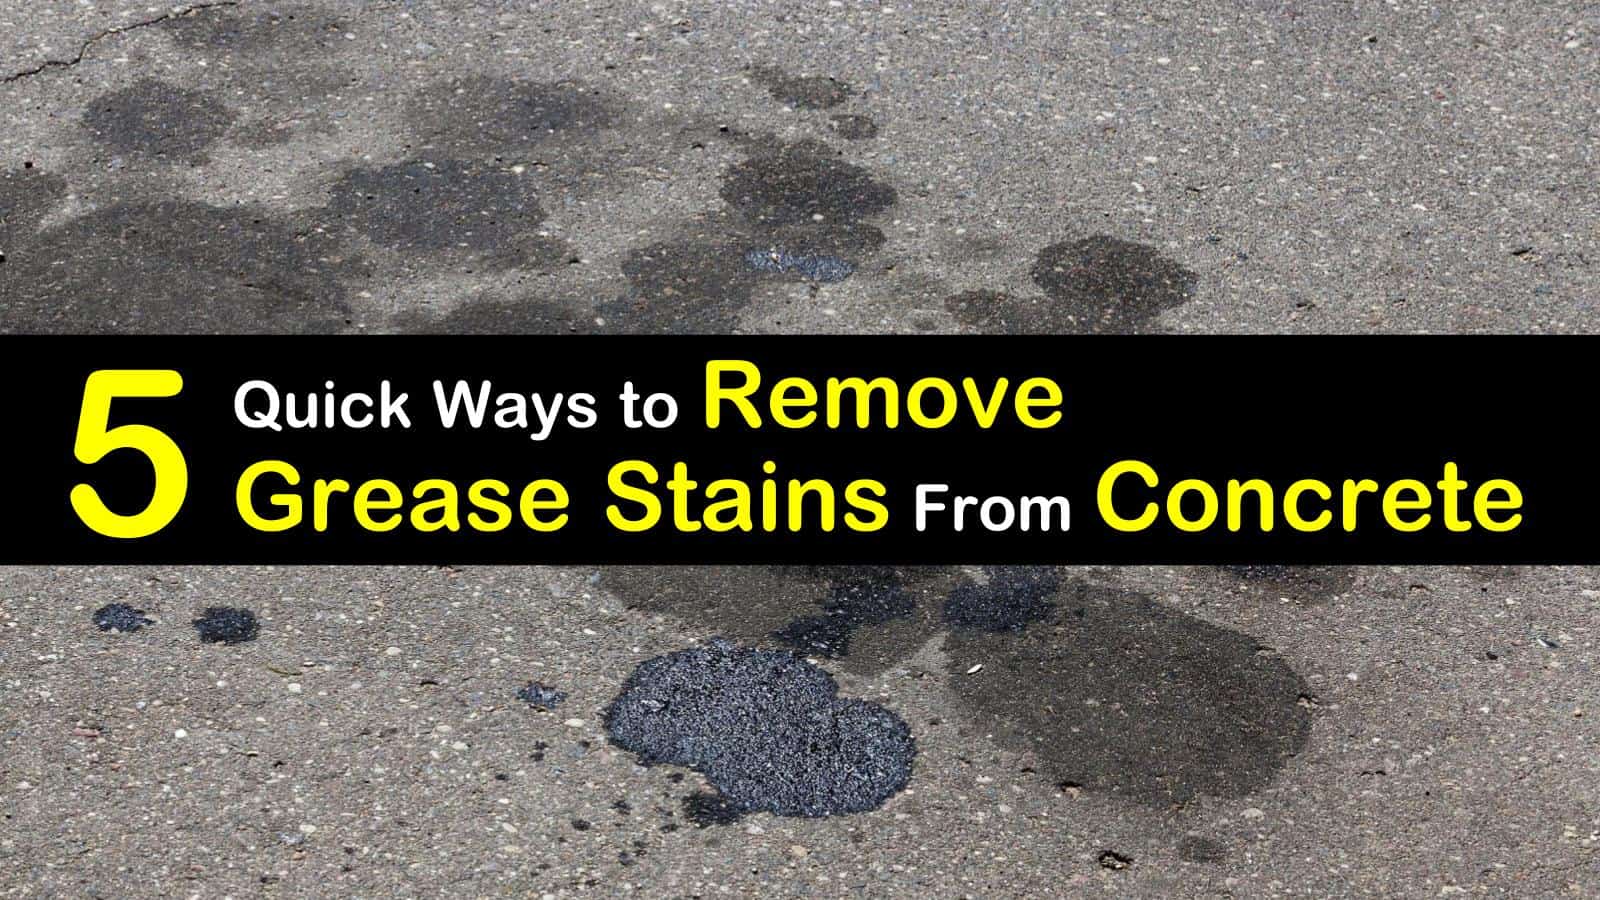 29 Quick Ways to Remove Grease Stains from Concrete